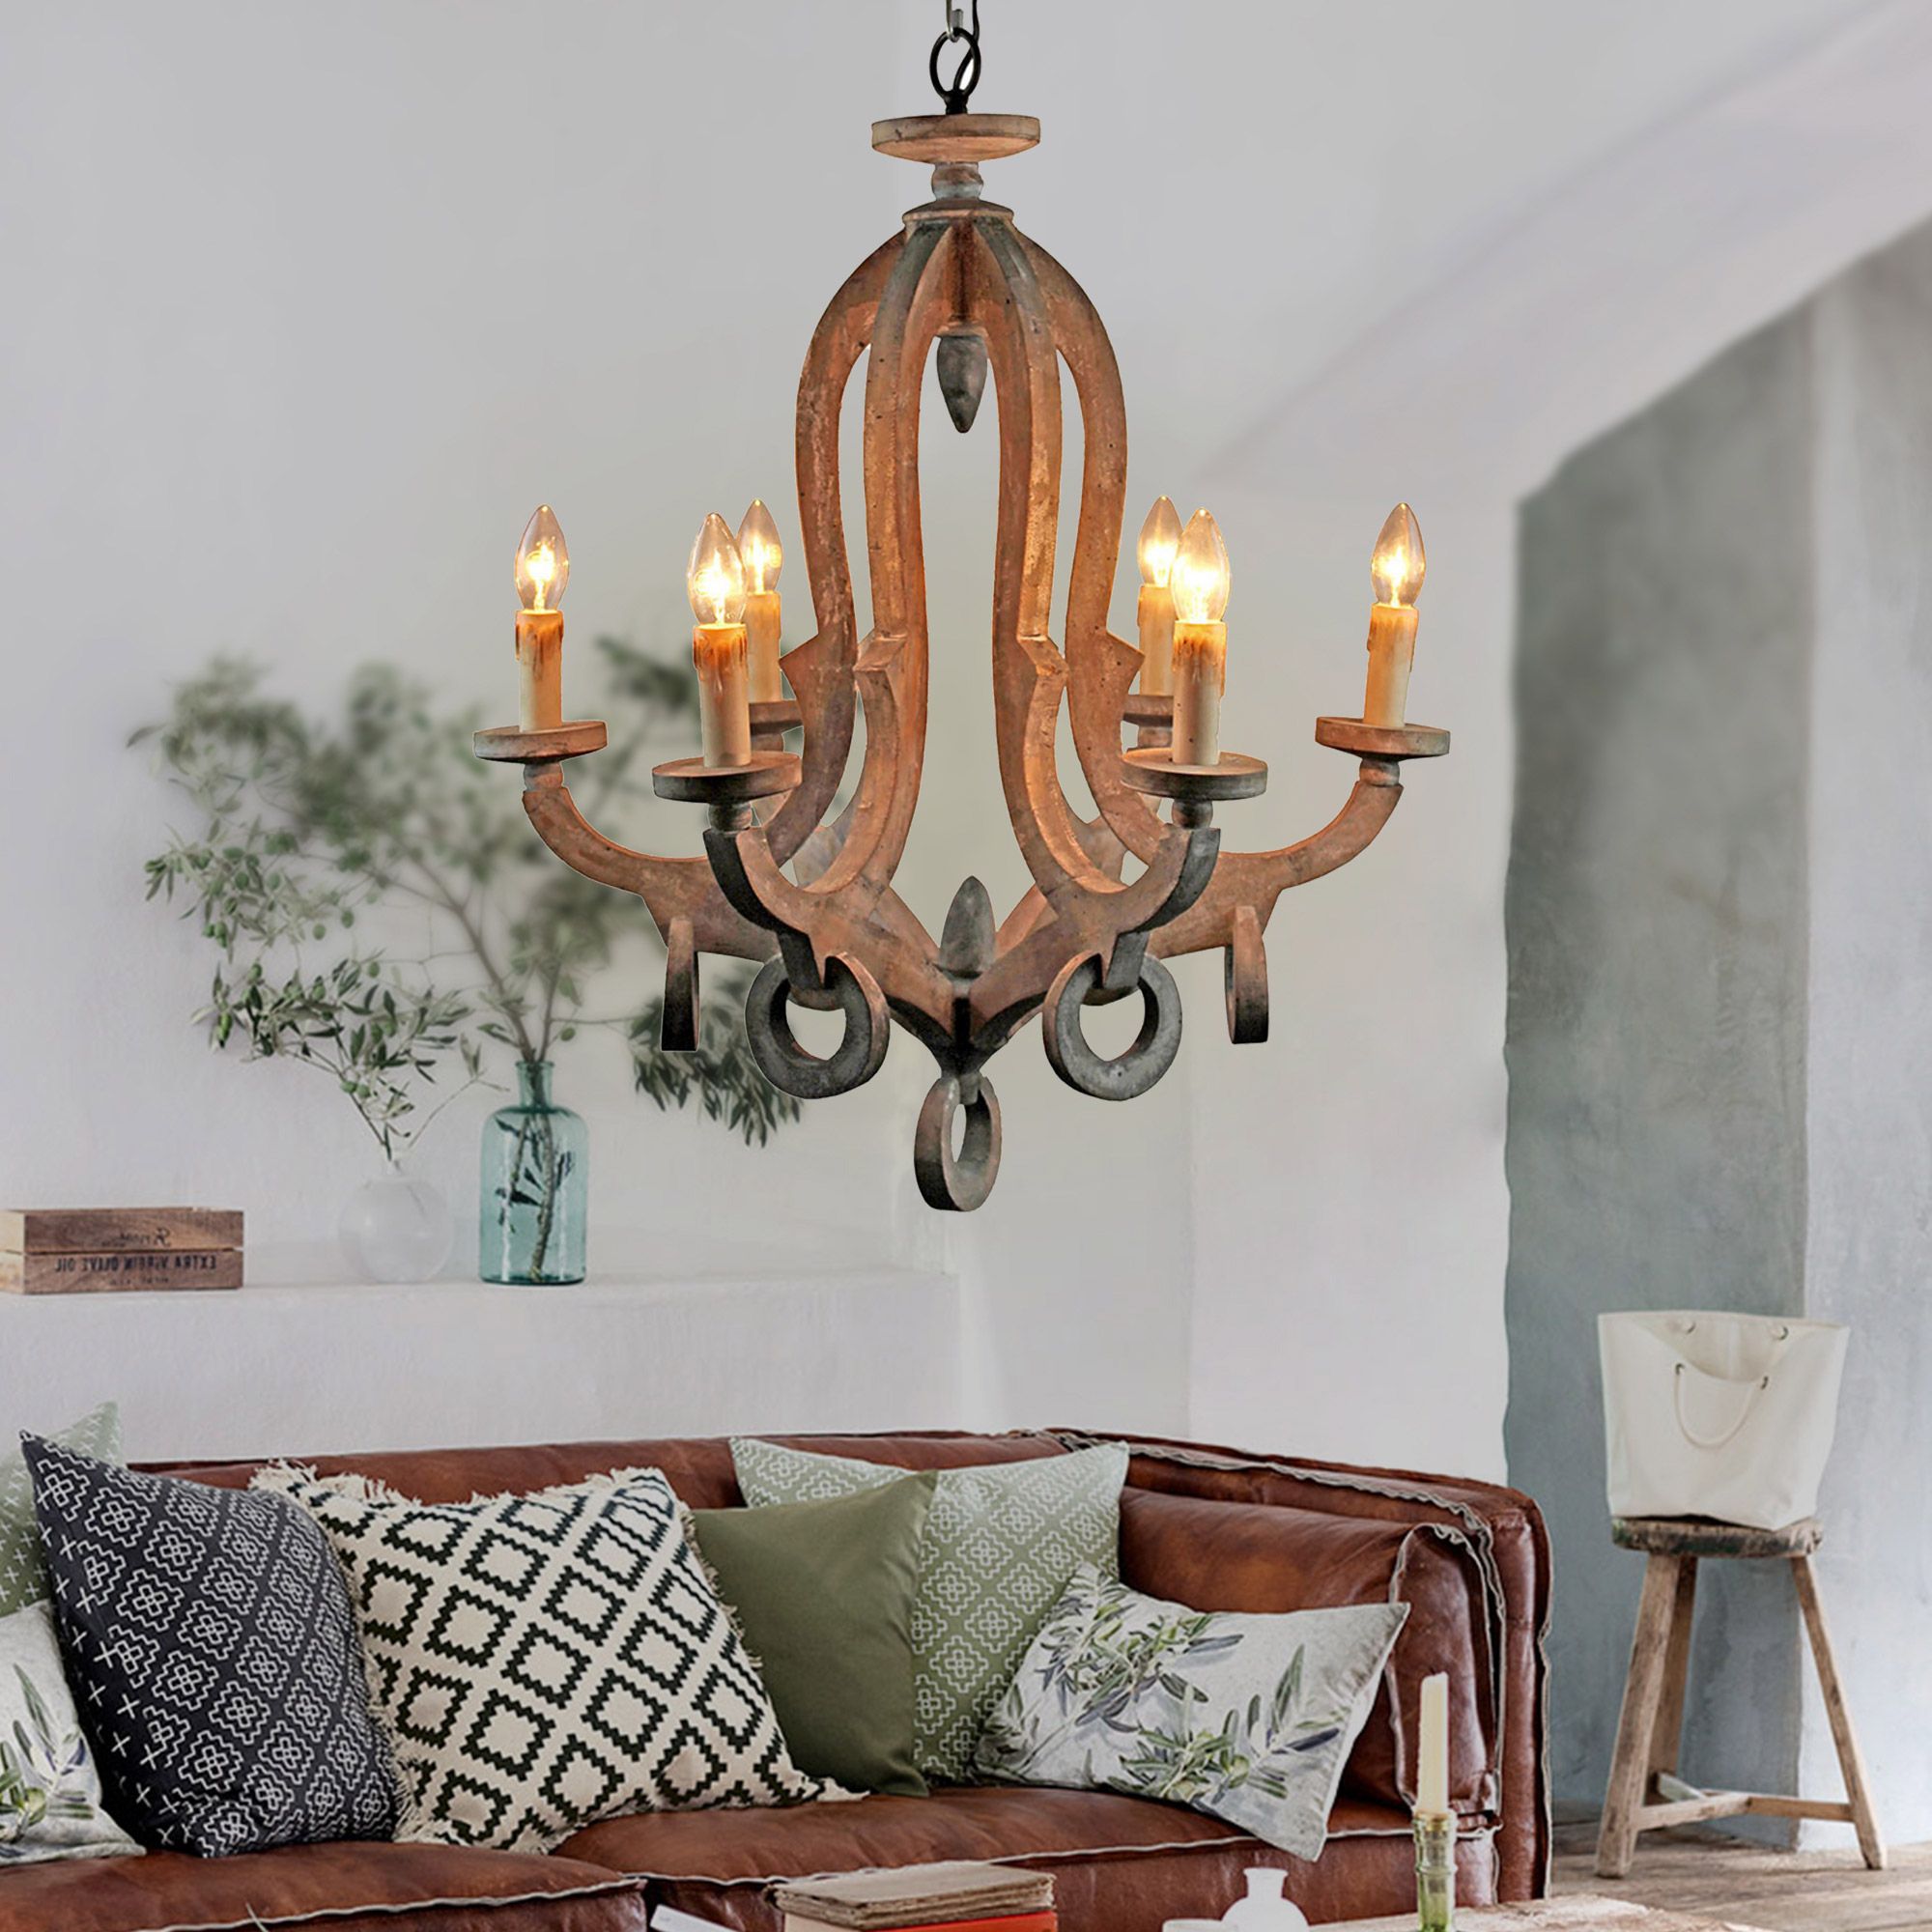 2020 Six Light Chandeliers With Farmhouse 6 Light Wooden Chandelier · Parrot Uncle (View 17 of 20)